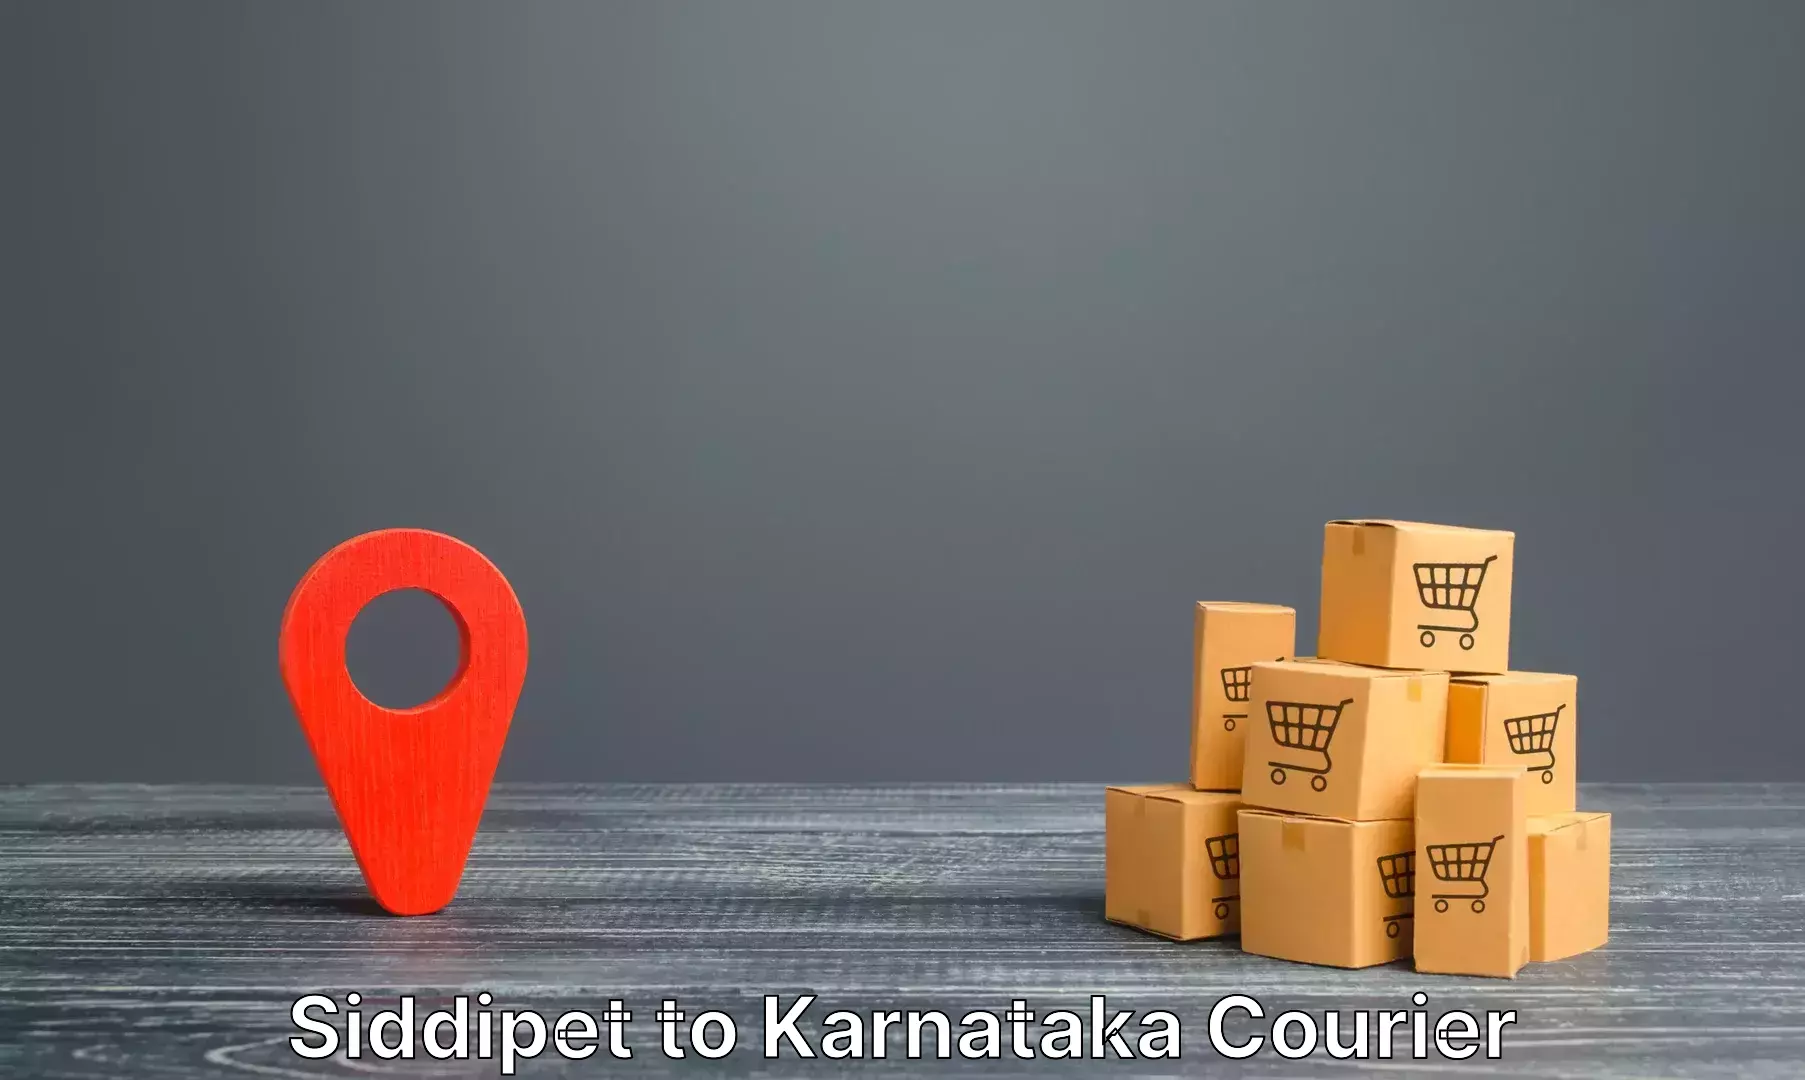 Luggage shipping specialists Siddipet to Chikkamagalur